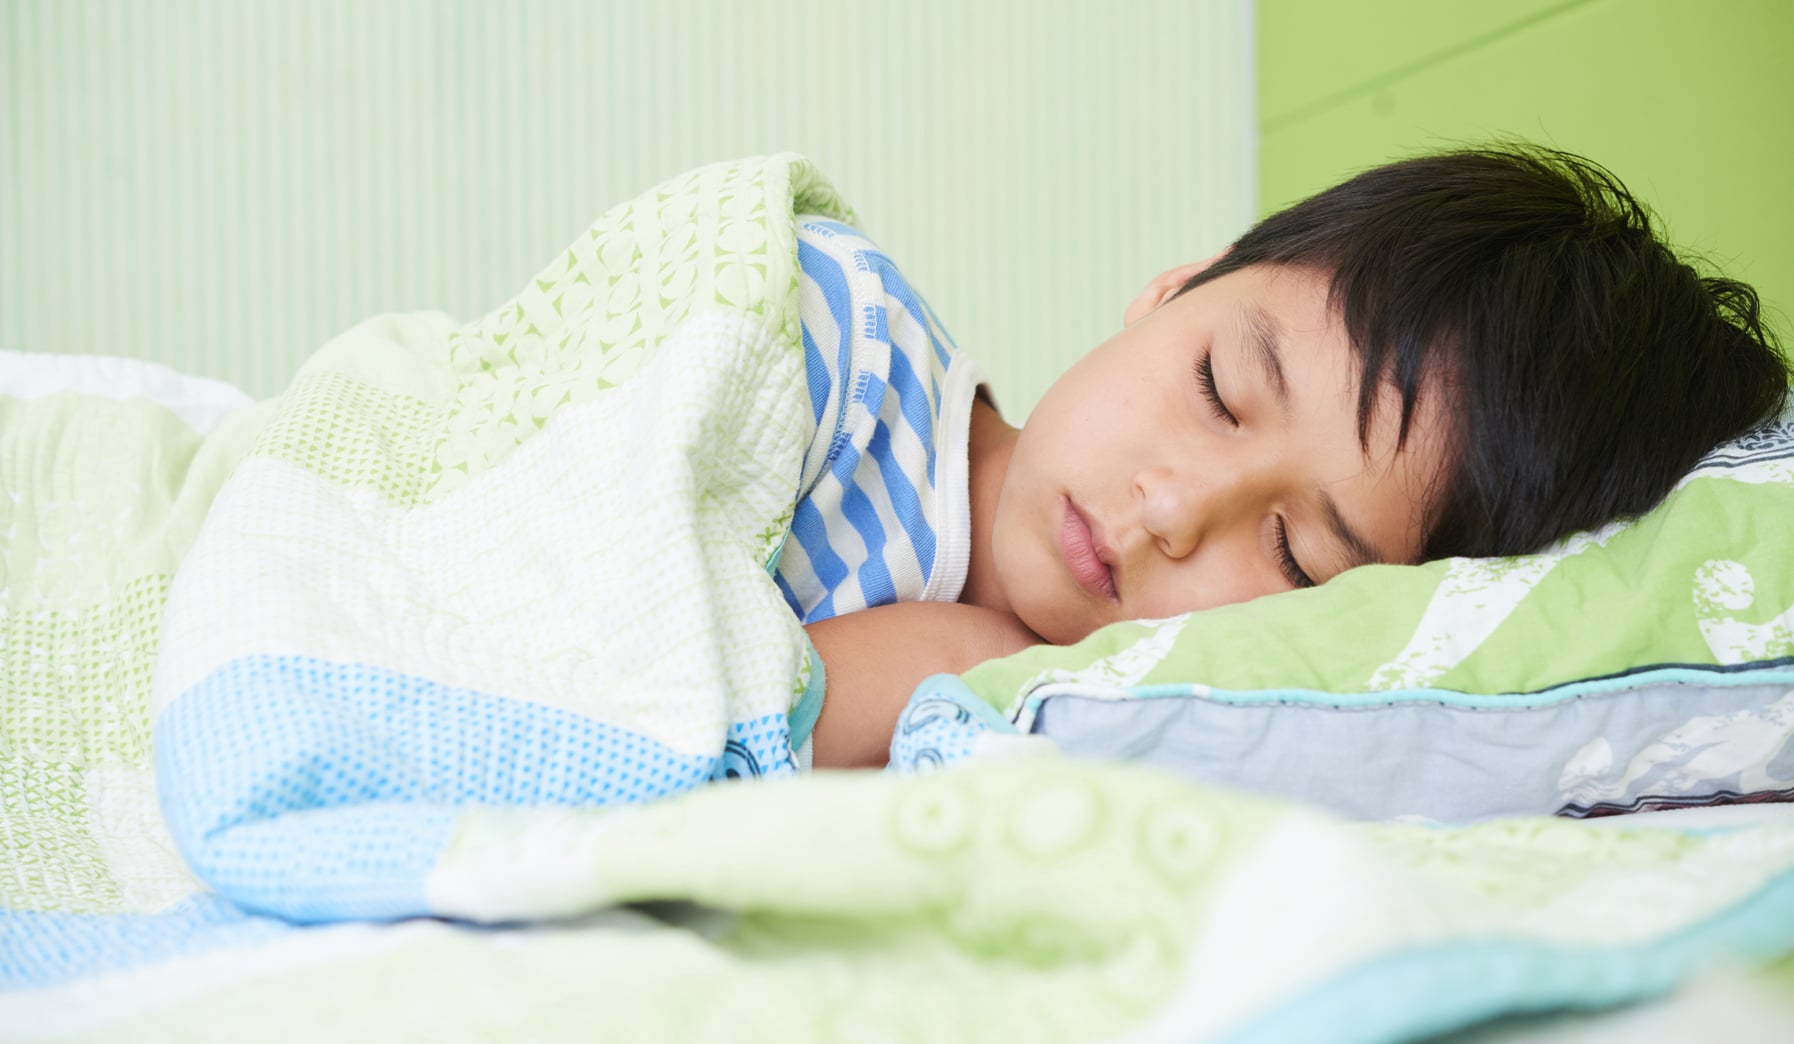 a small boy with black hair rests peacefully on a quilted pillow and under a quilted bed comforter that is in soft pastel colors of green and blue